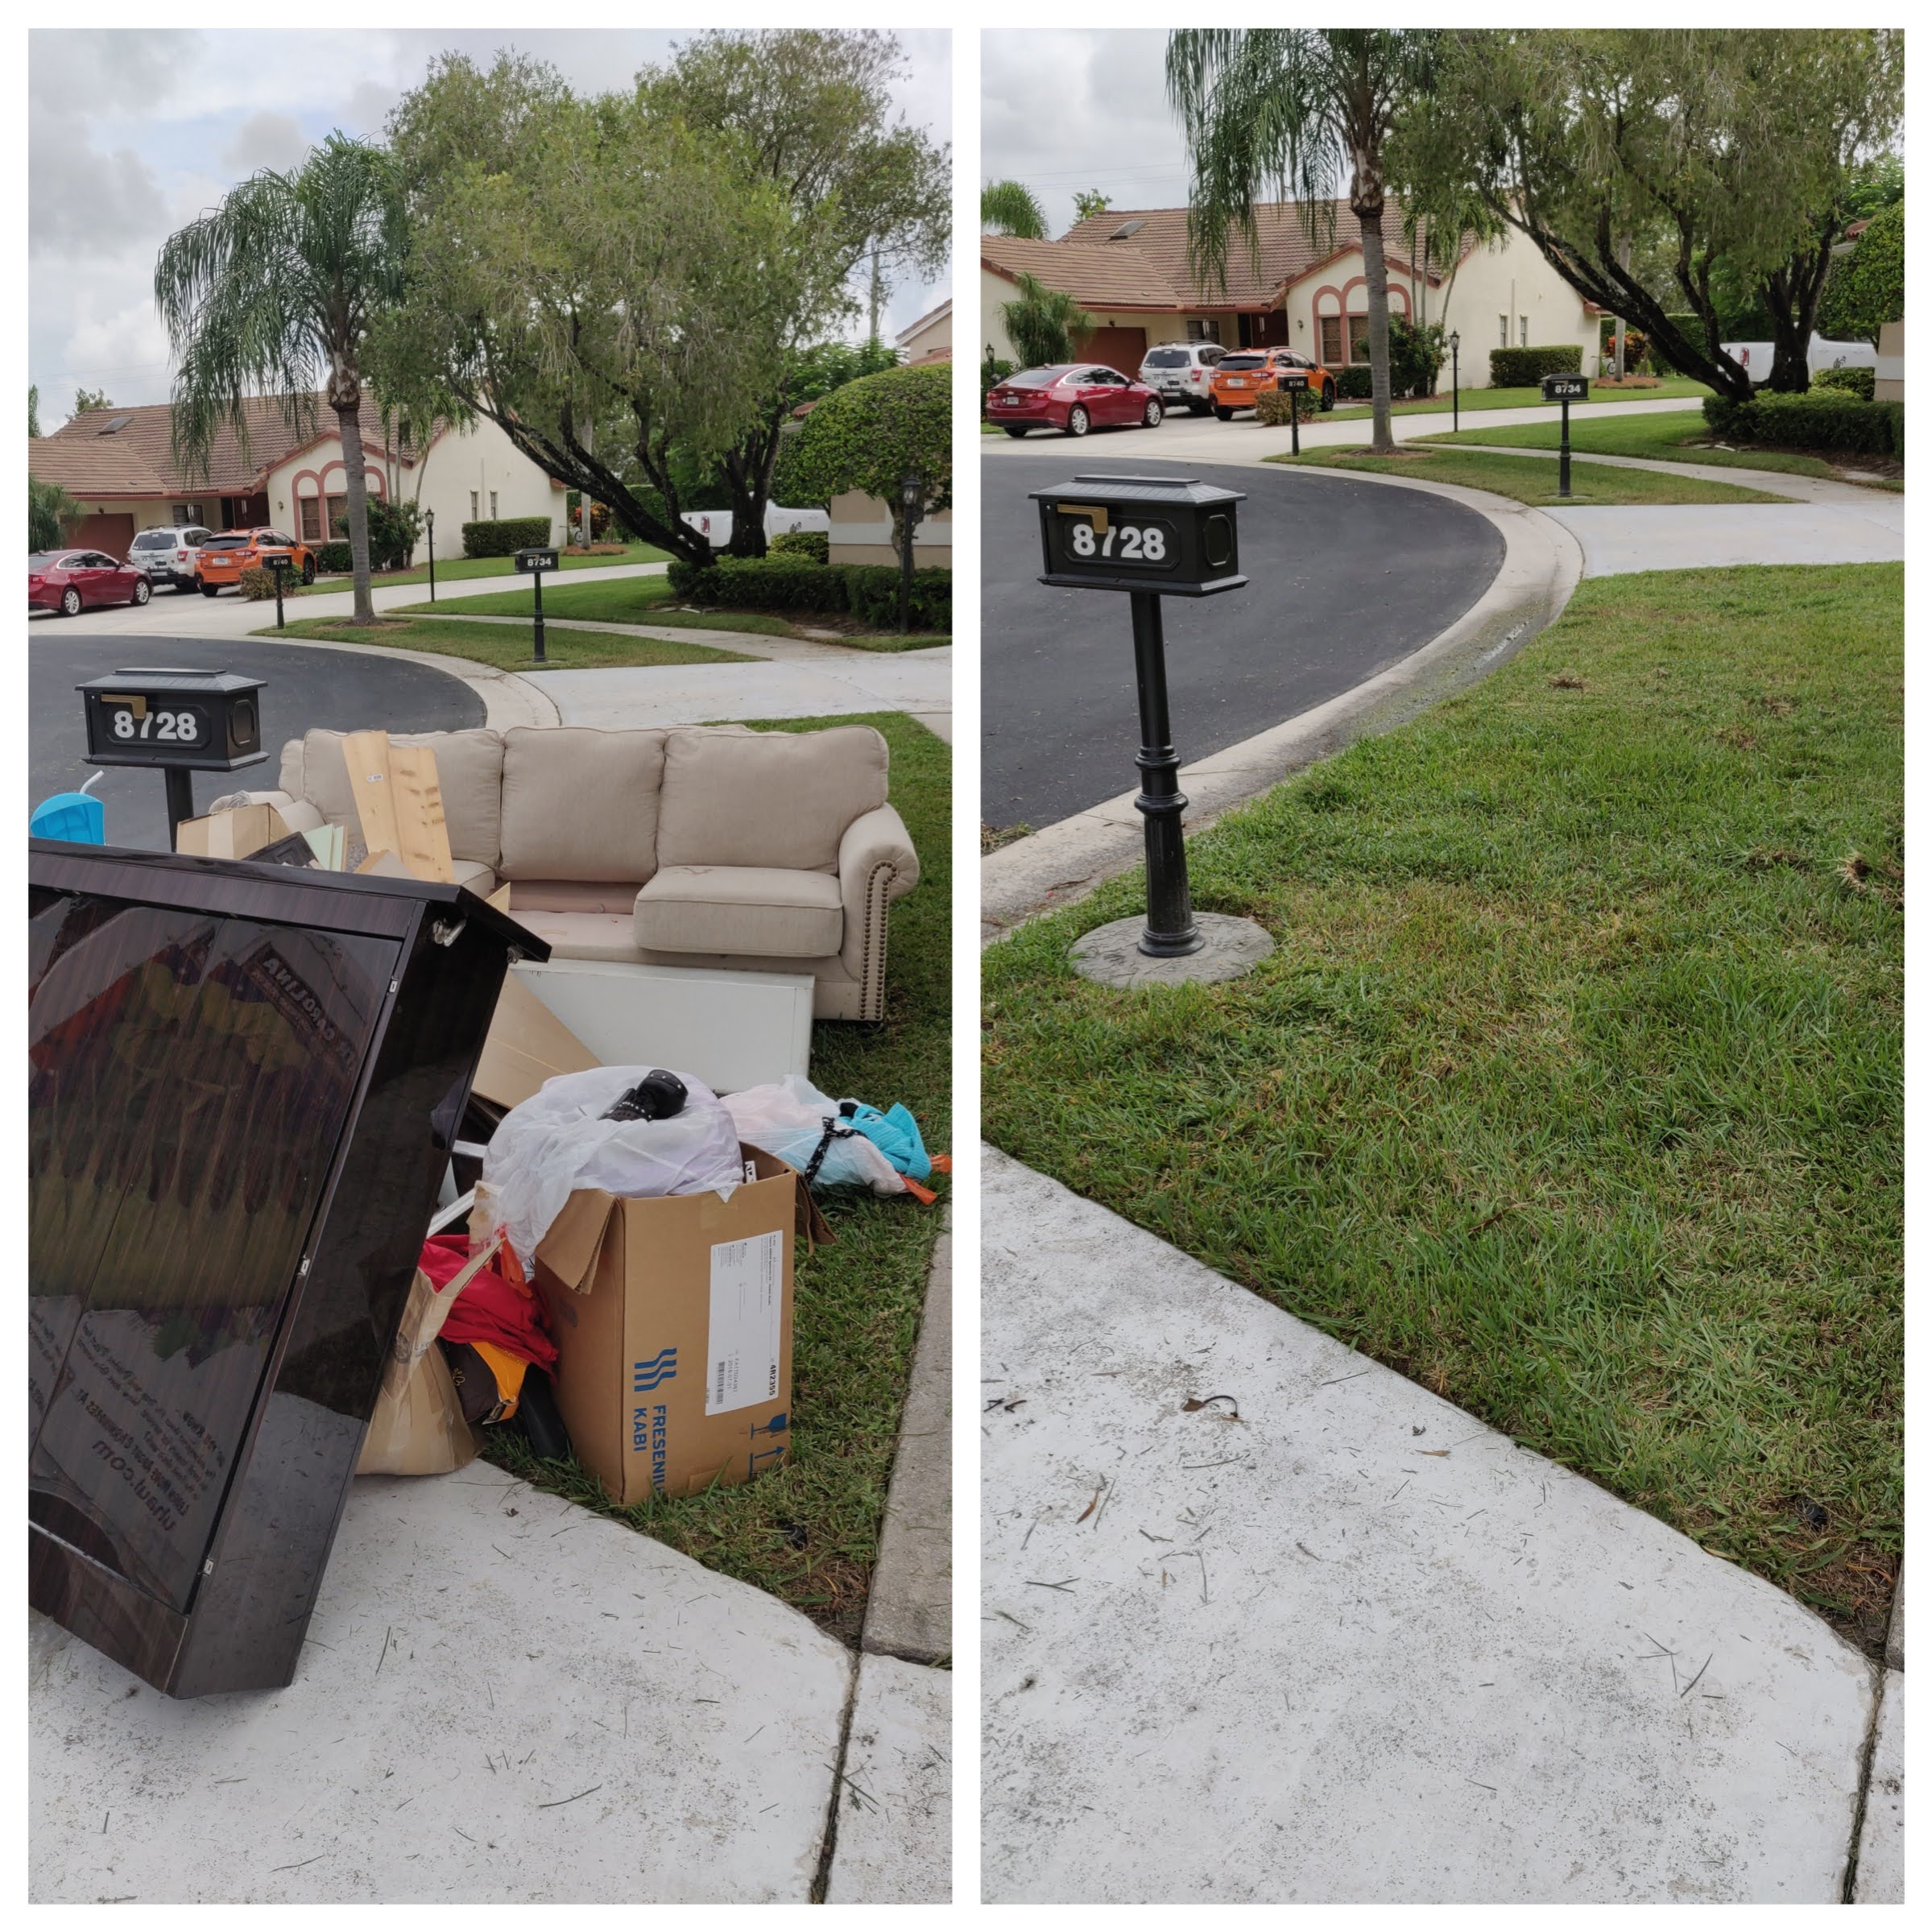 Household Items and furniture out on Street Curb waiting for Junk Removal Pickup.